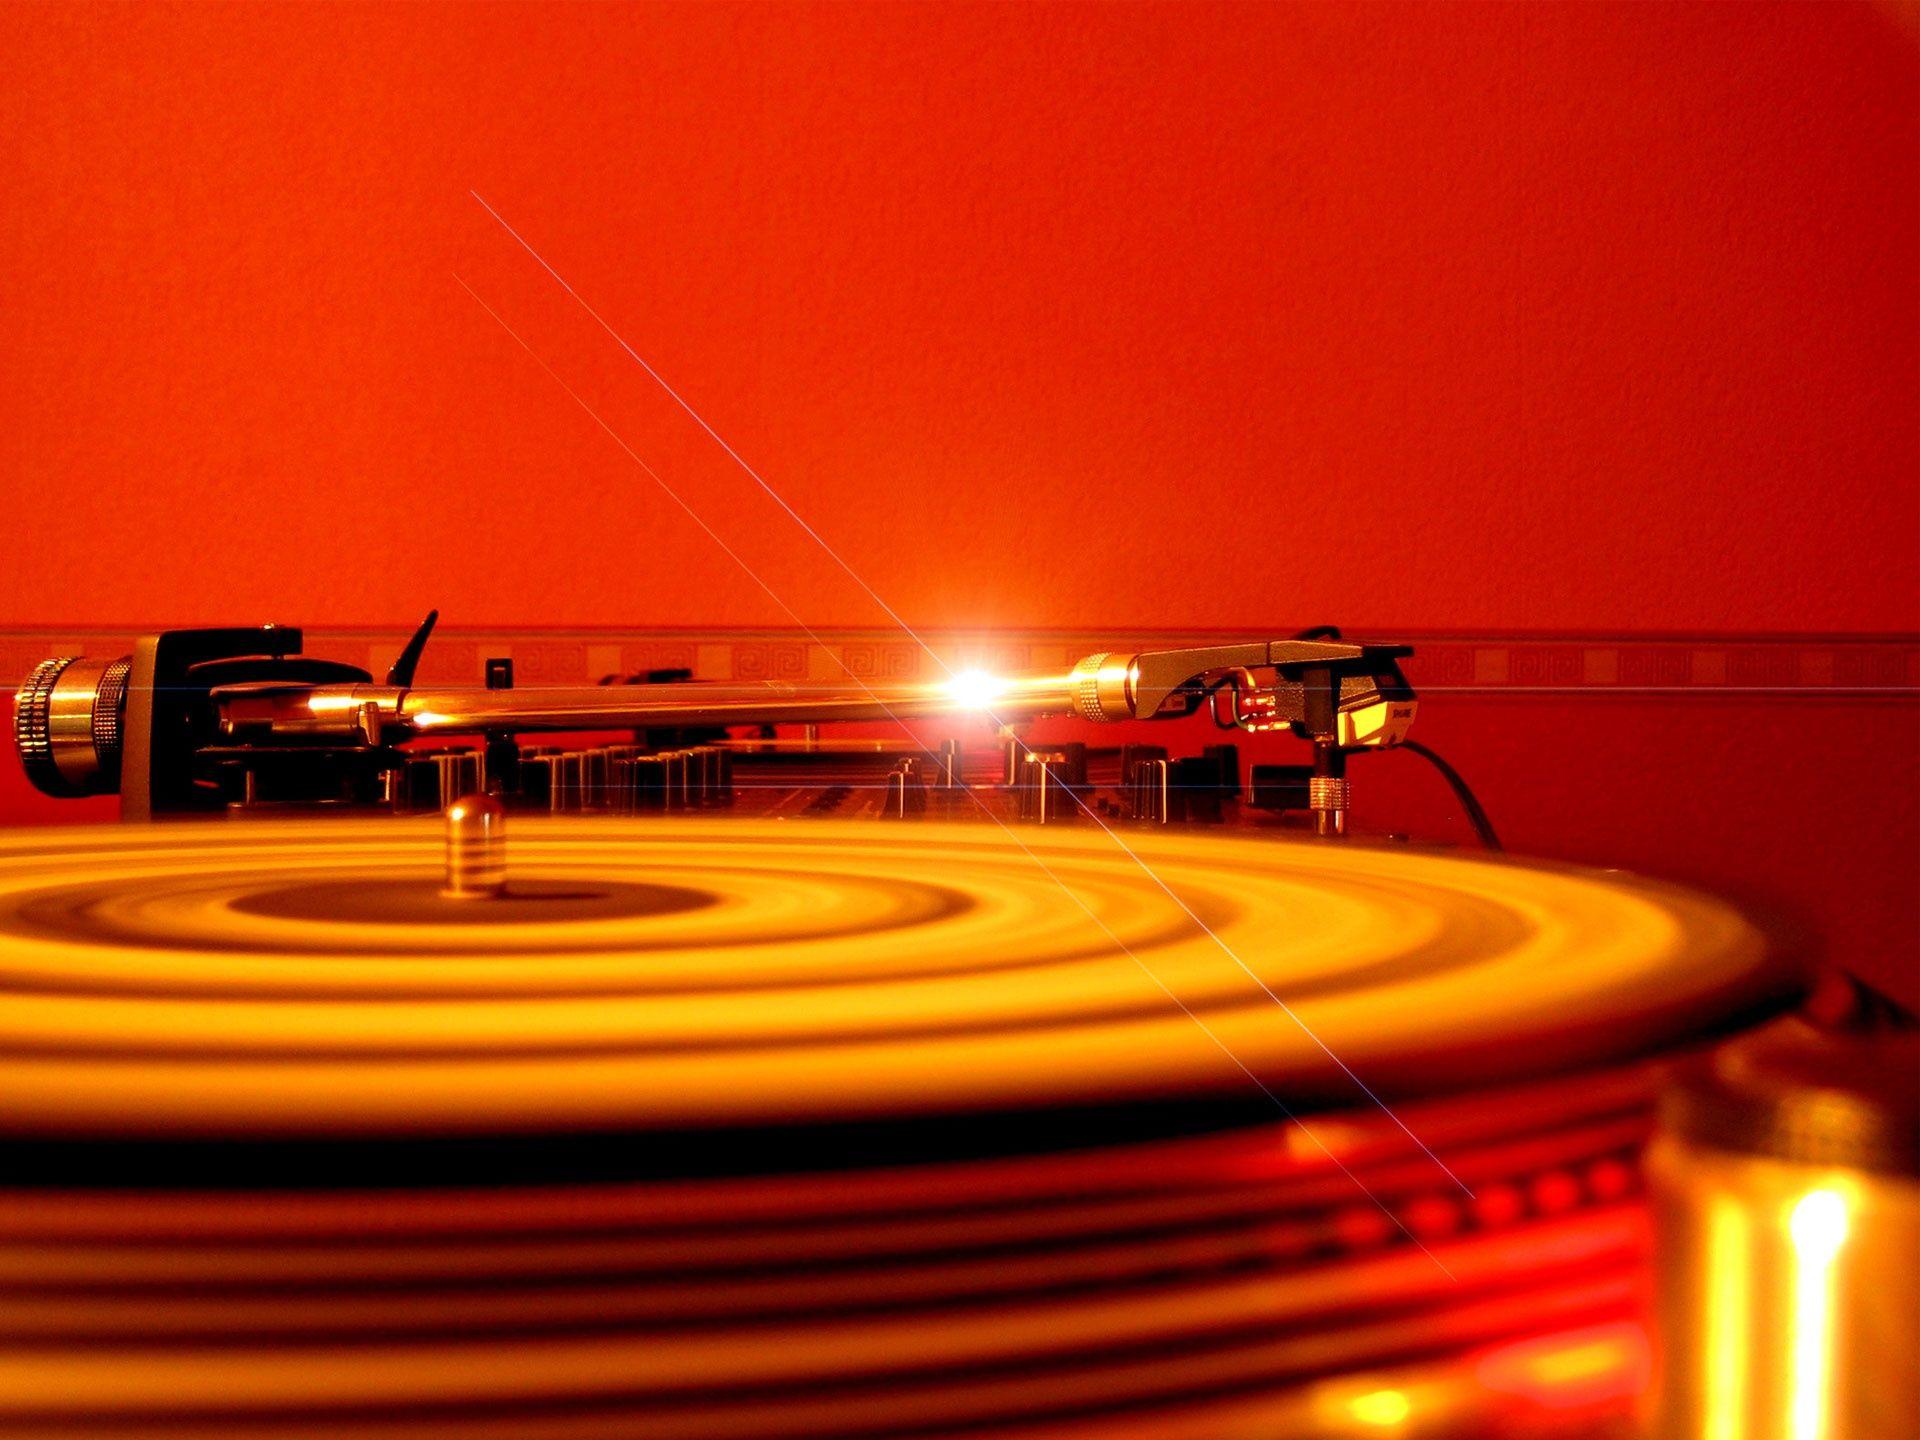 Turntable Wallpaper, HD Turntable Wallpaper and Photo